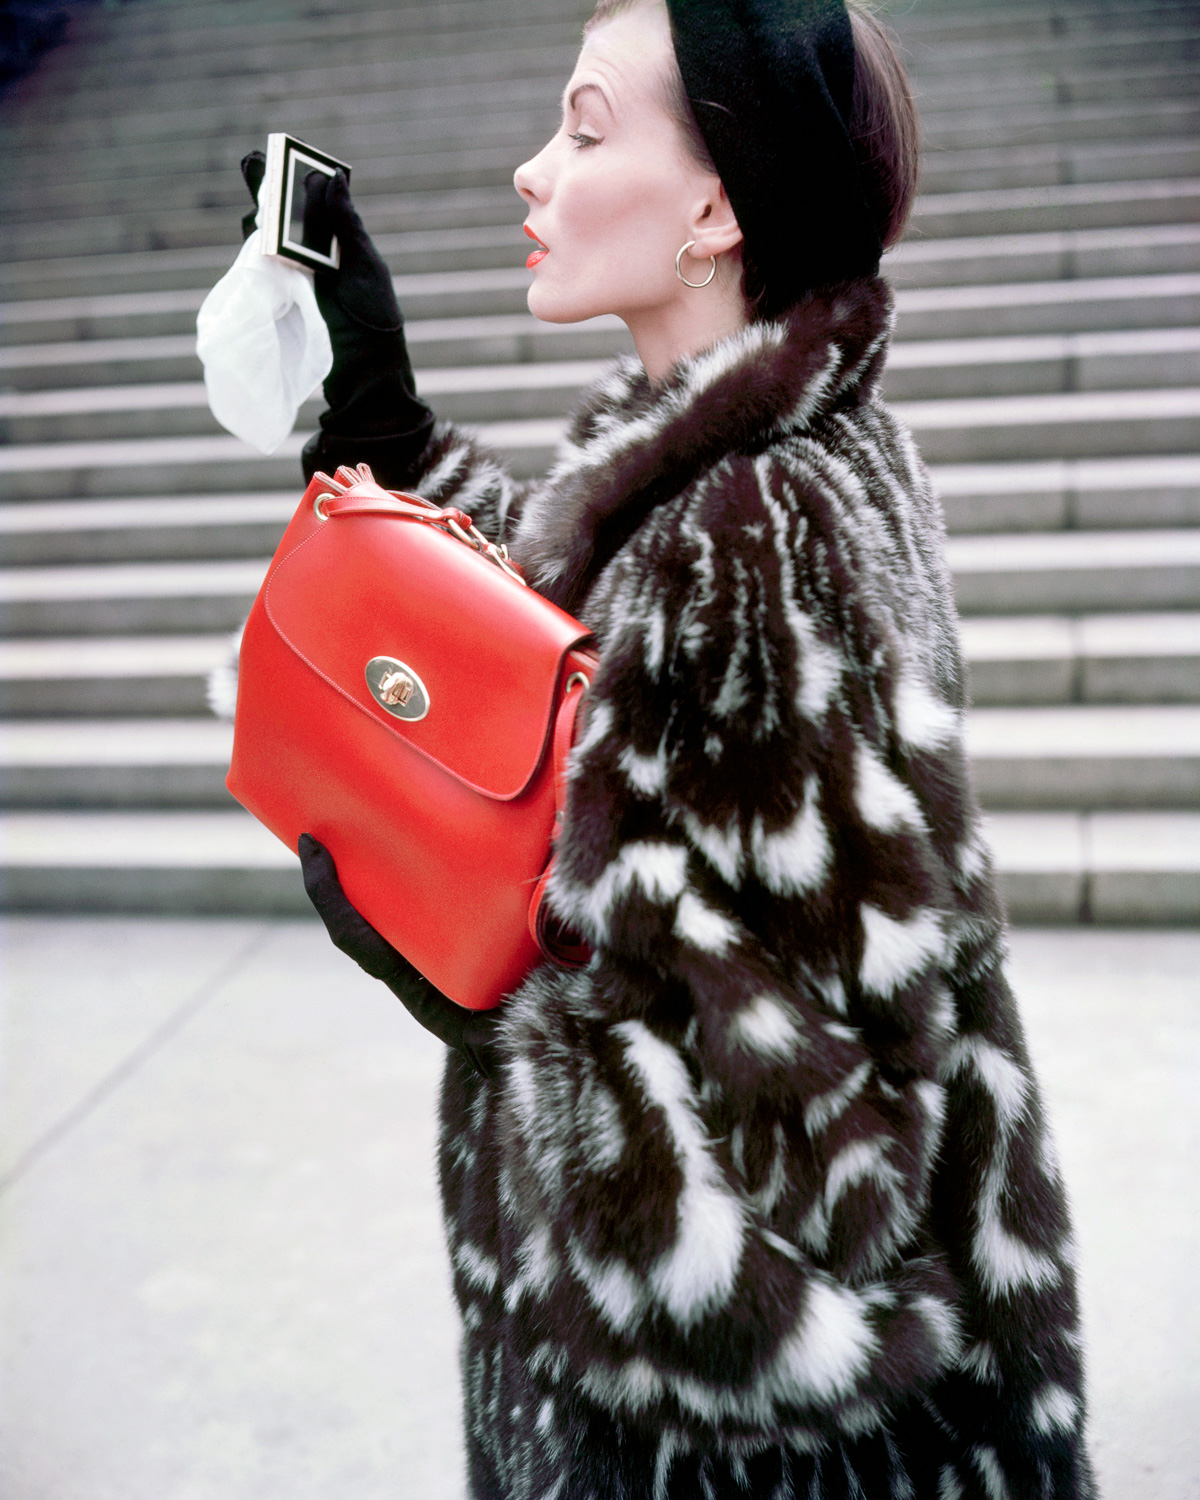 Modeling a Fur Jacket and Red Purse